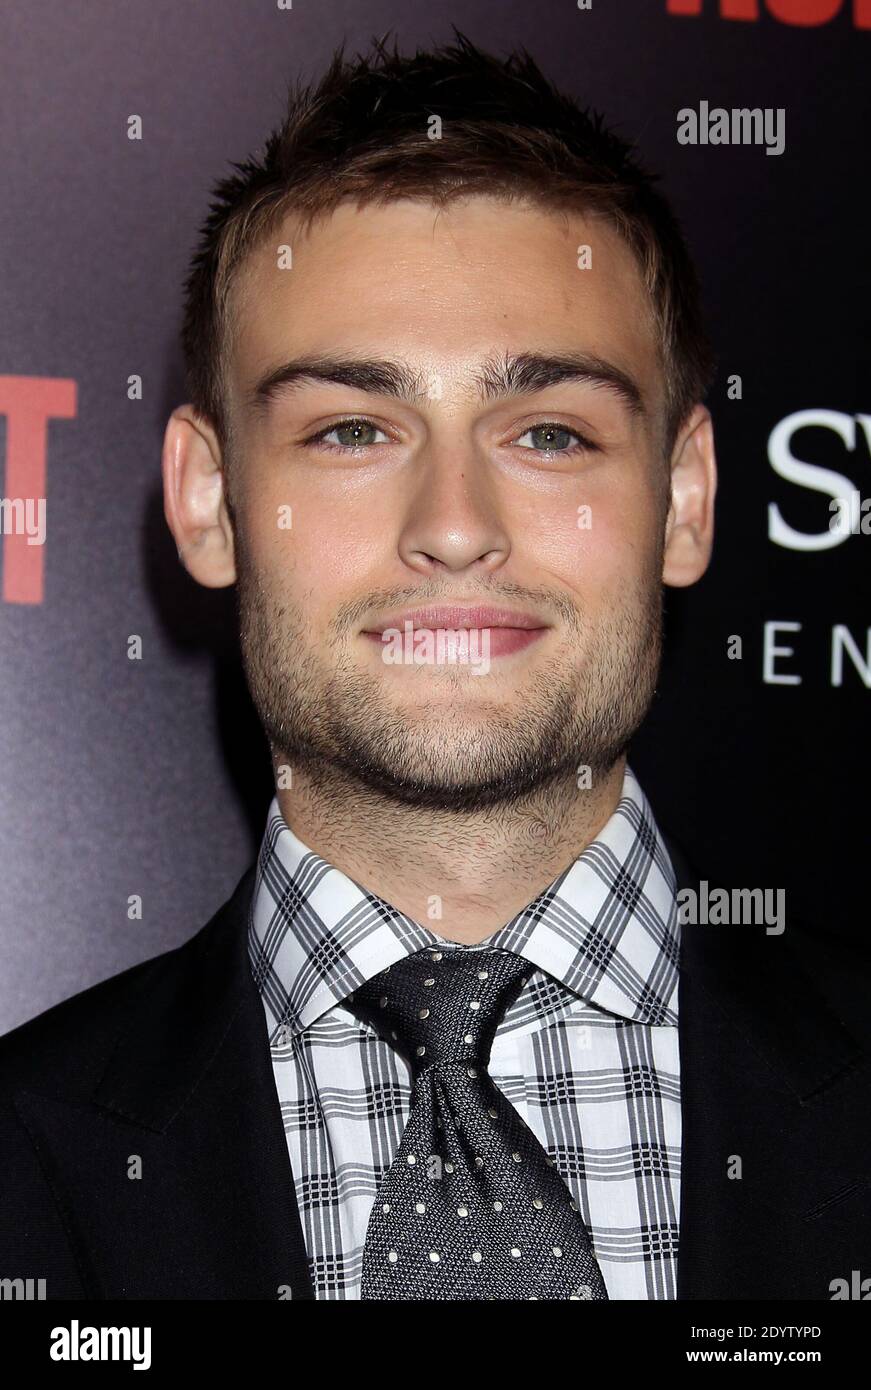 Douglas Booth, Relativity's film premiere for Romeo & Juliet at the Arclight Theatre in Hollywood, Los Angeles, CA, USA. September 24, 2013 (Douglas Booth) Photo by Baxter/ABACAPRESS.COM Stock Photo